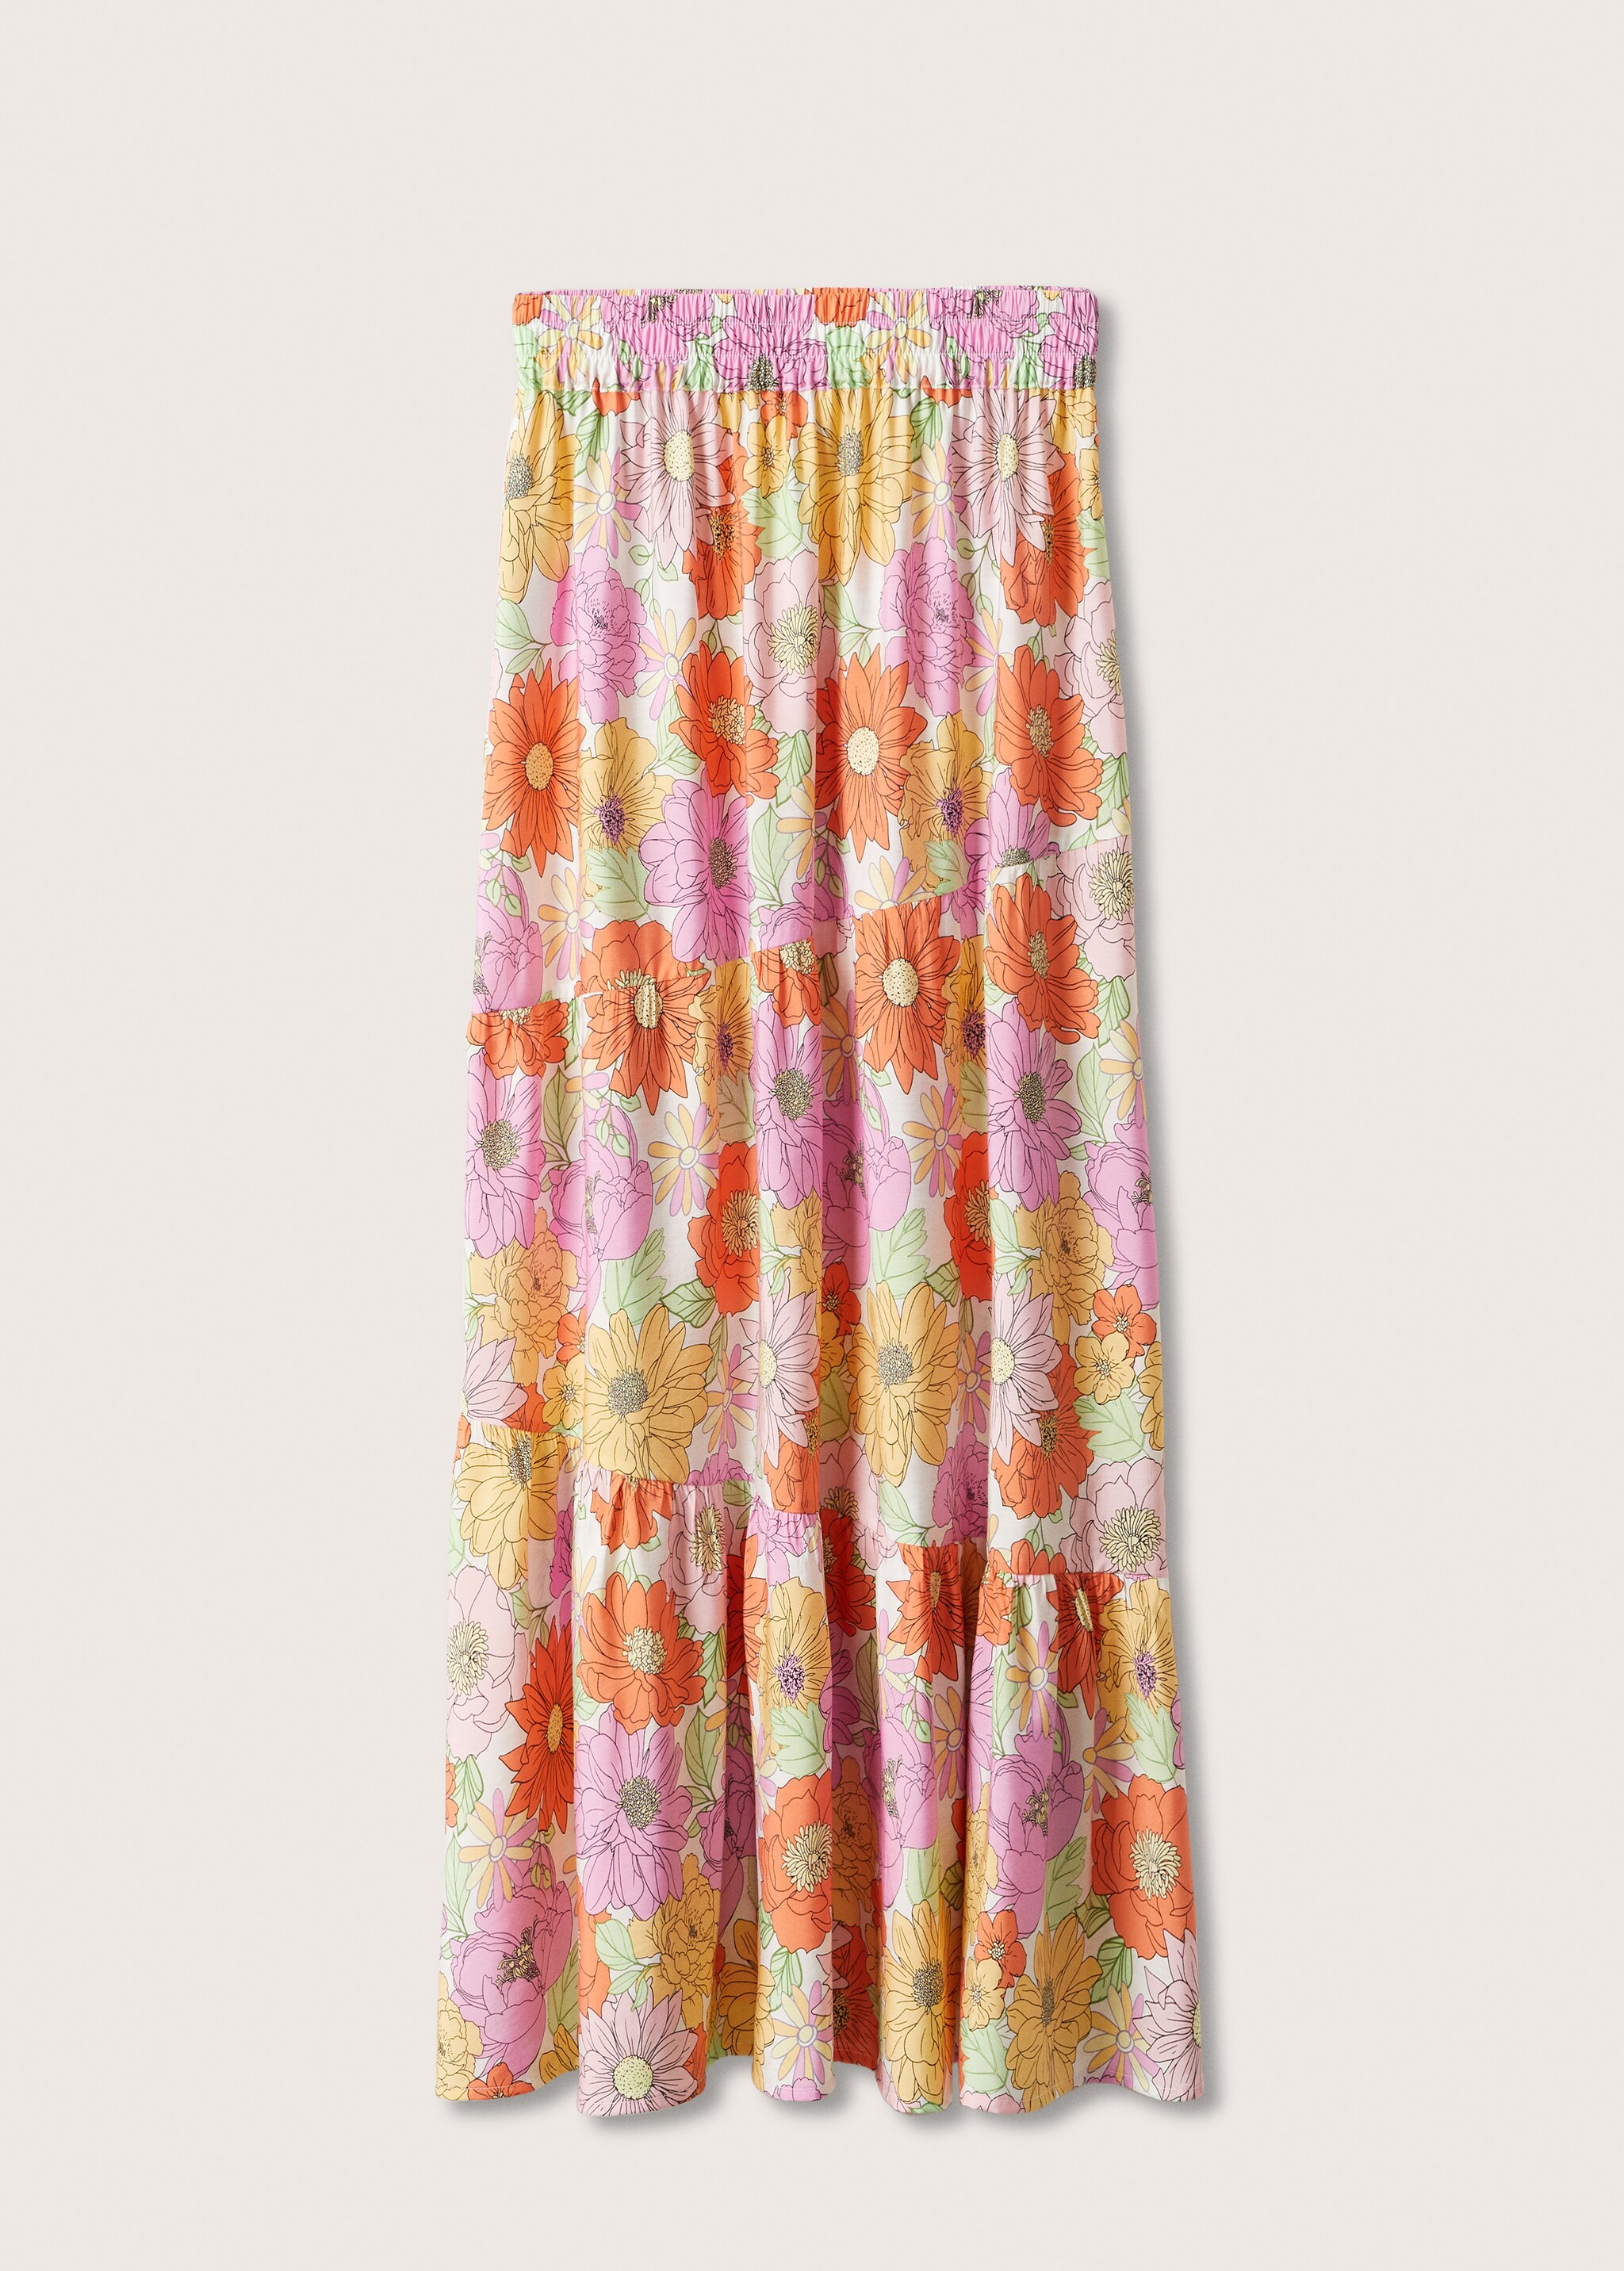 Printed ruffle skirt - Article without model